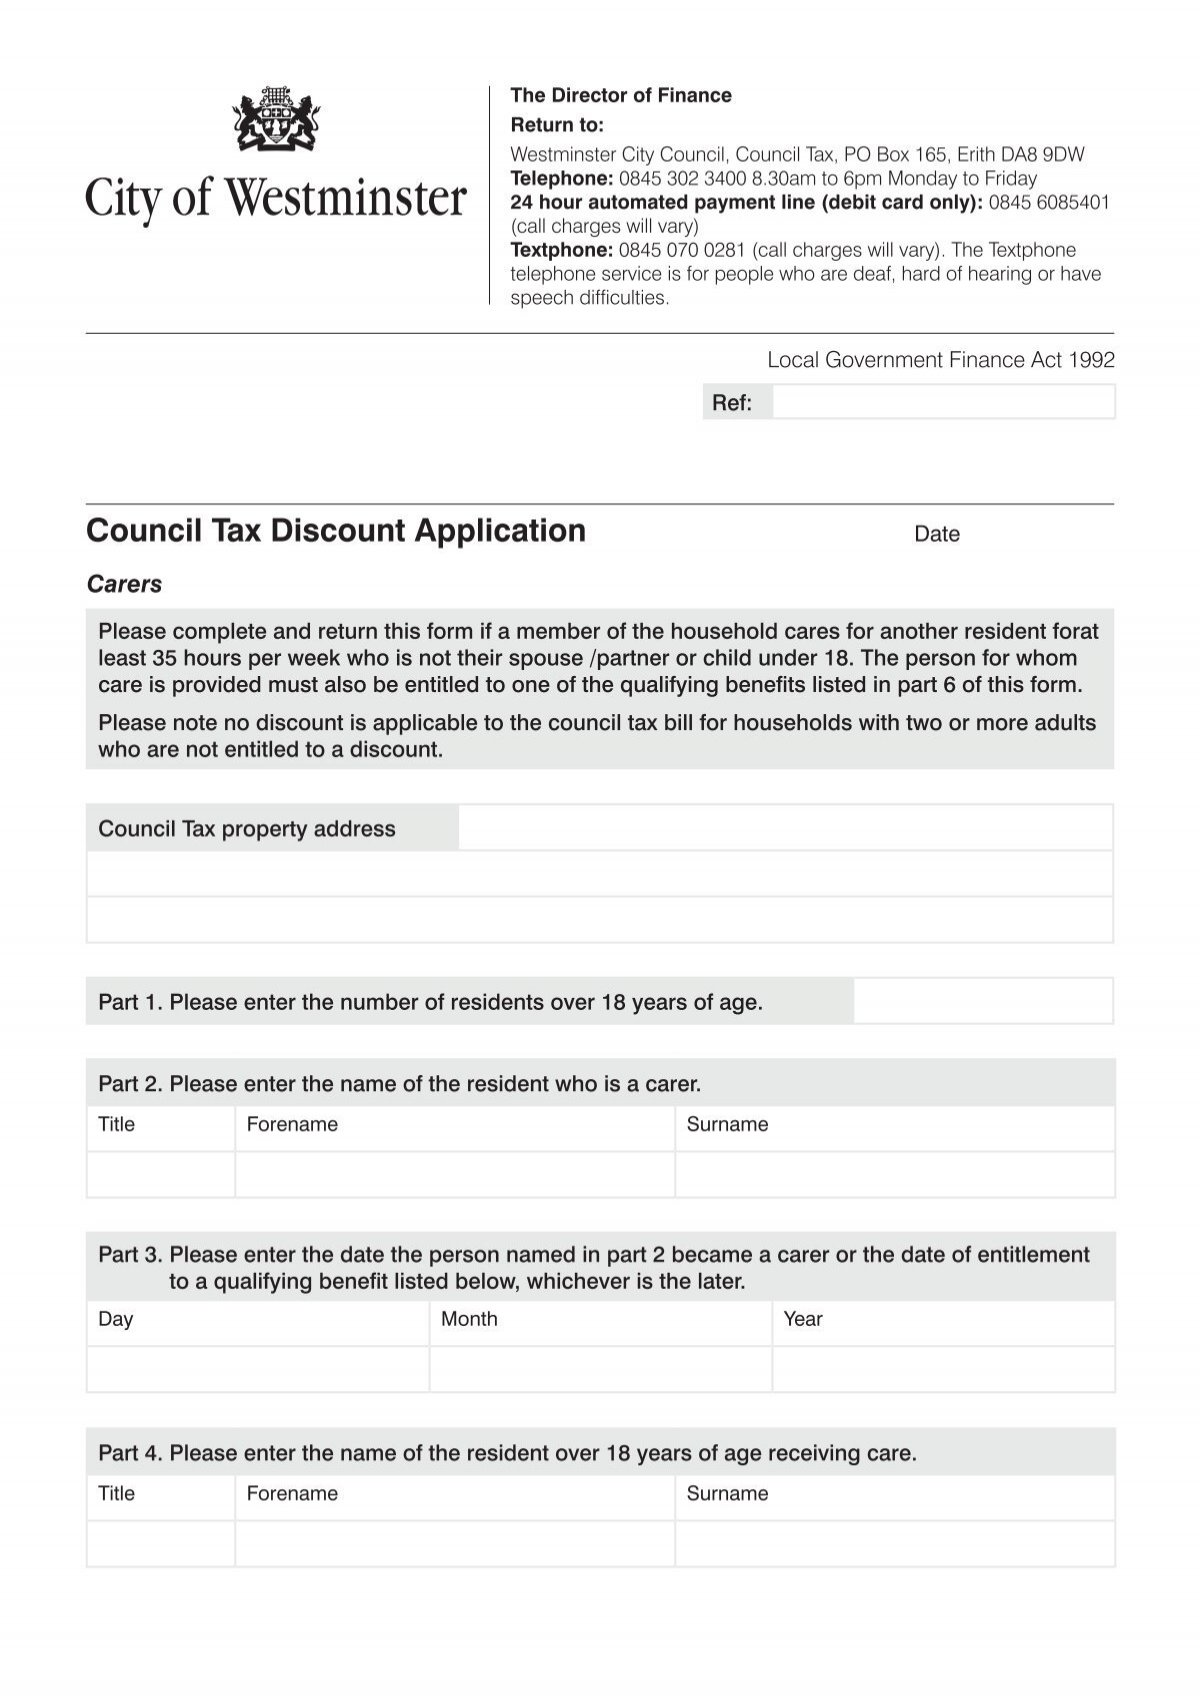 council-tax-discount-application-form-fill-out-and-sign-printable-pdf